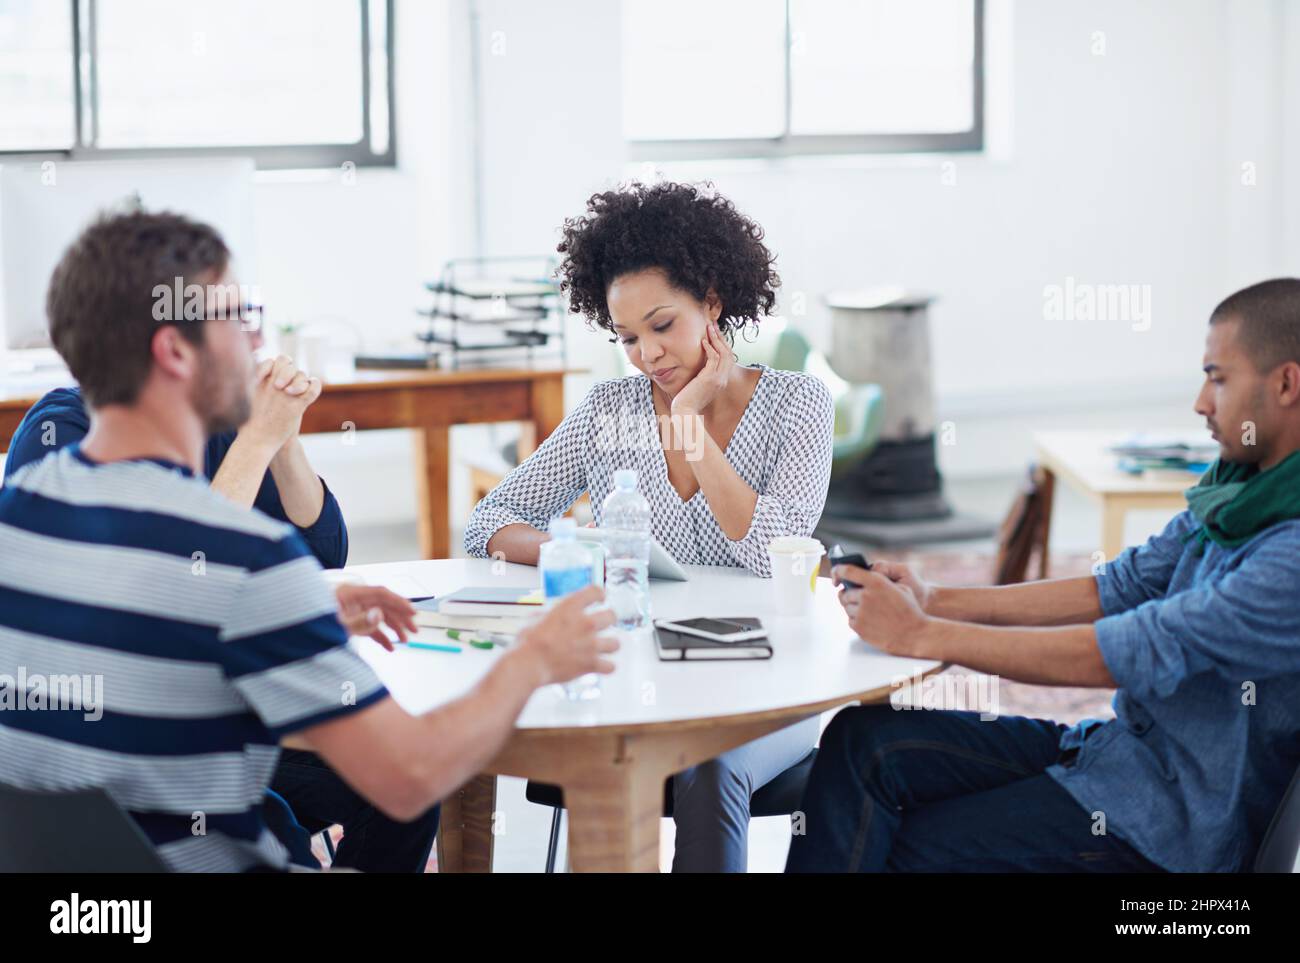 Exchanging great ideas. Shot of young designers at work in an office. Stock Photo